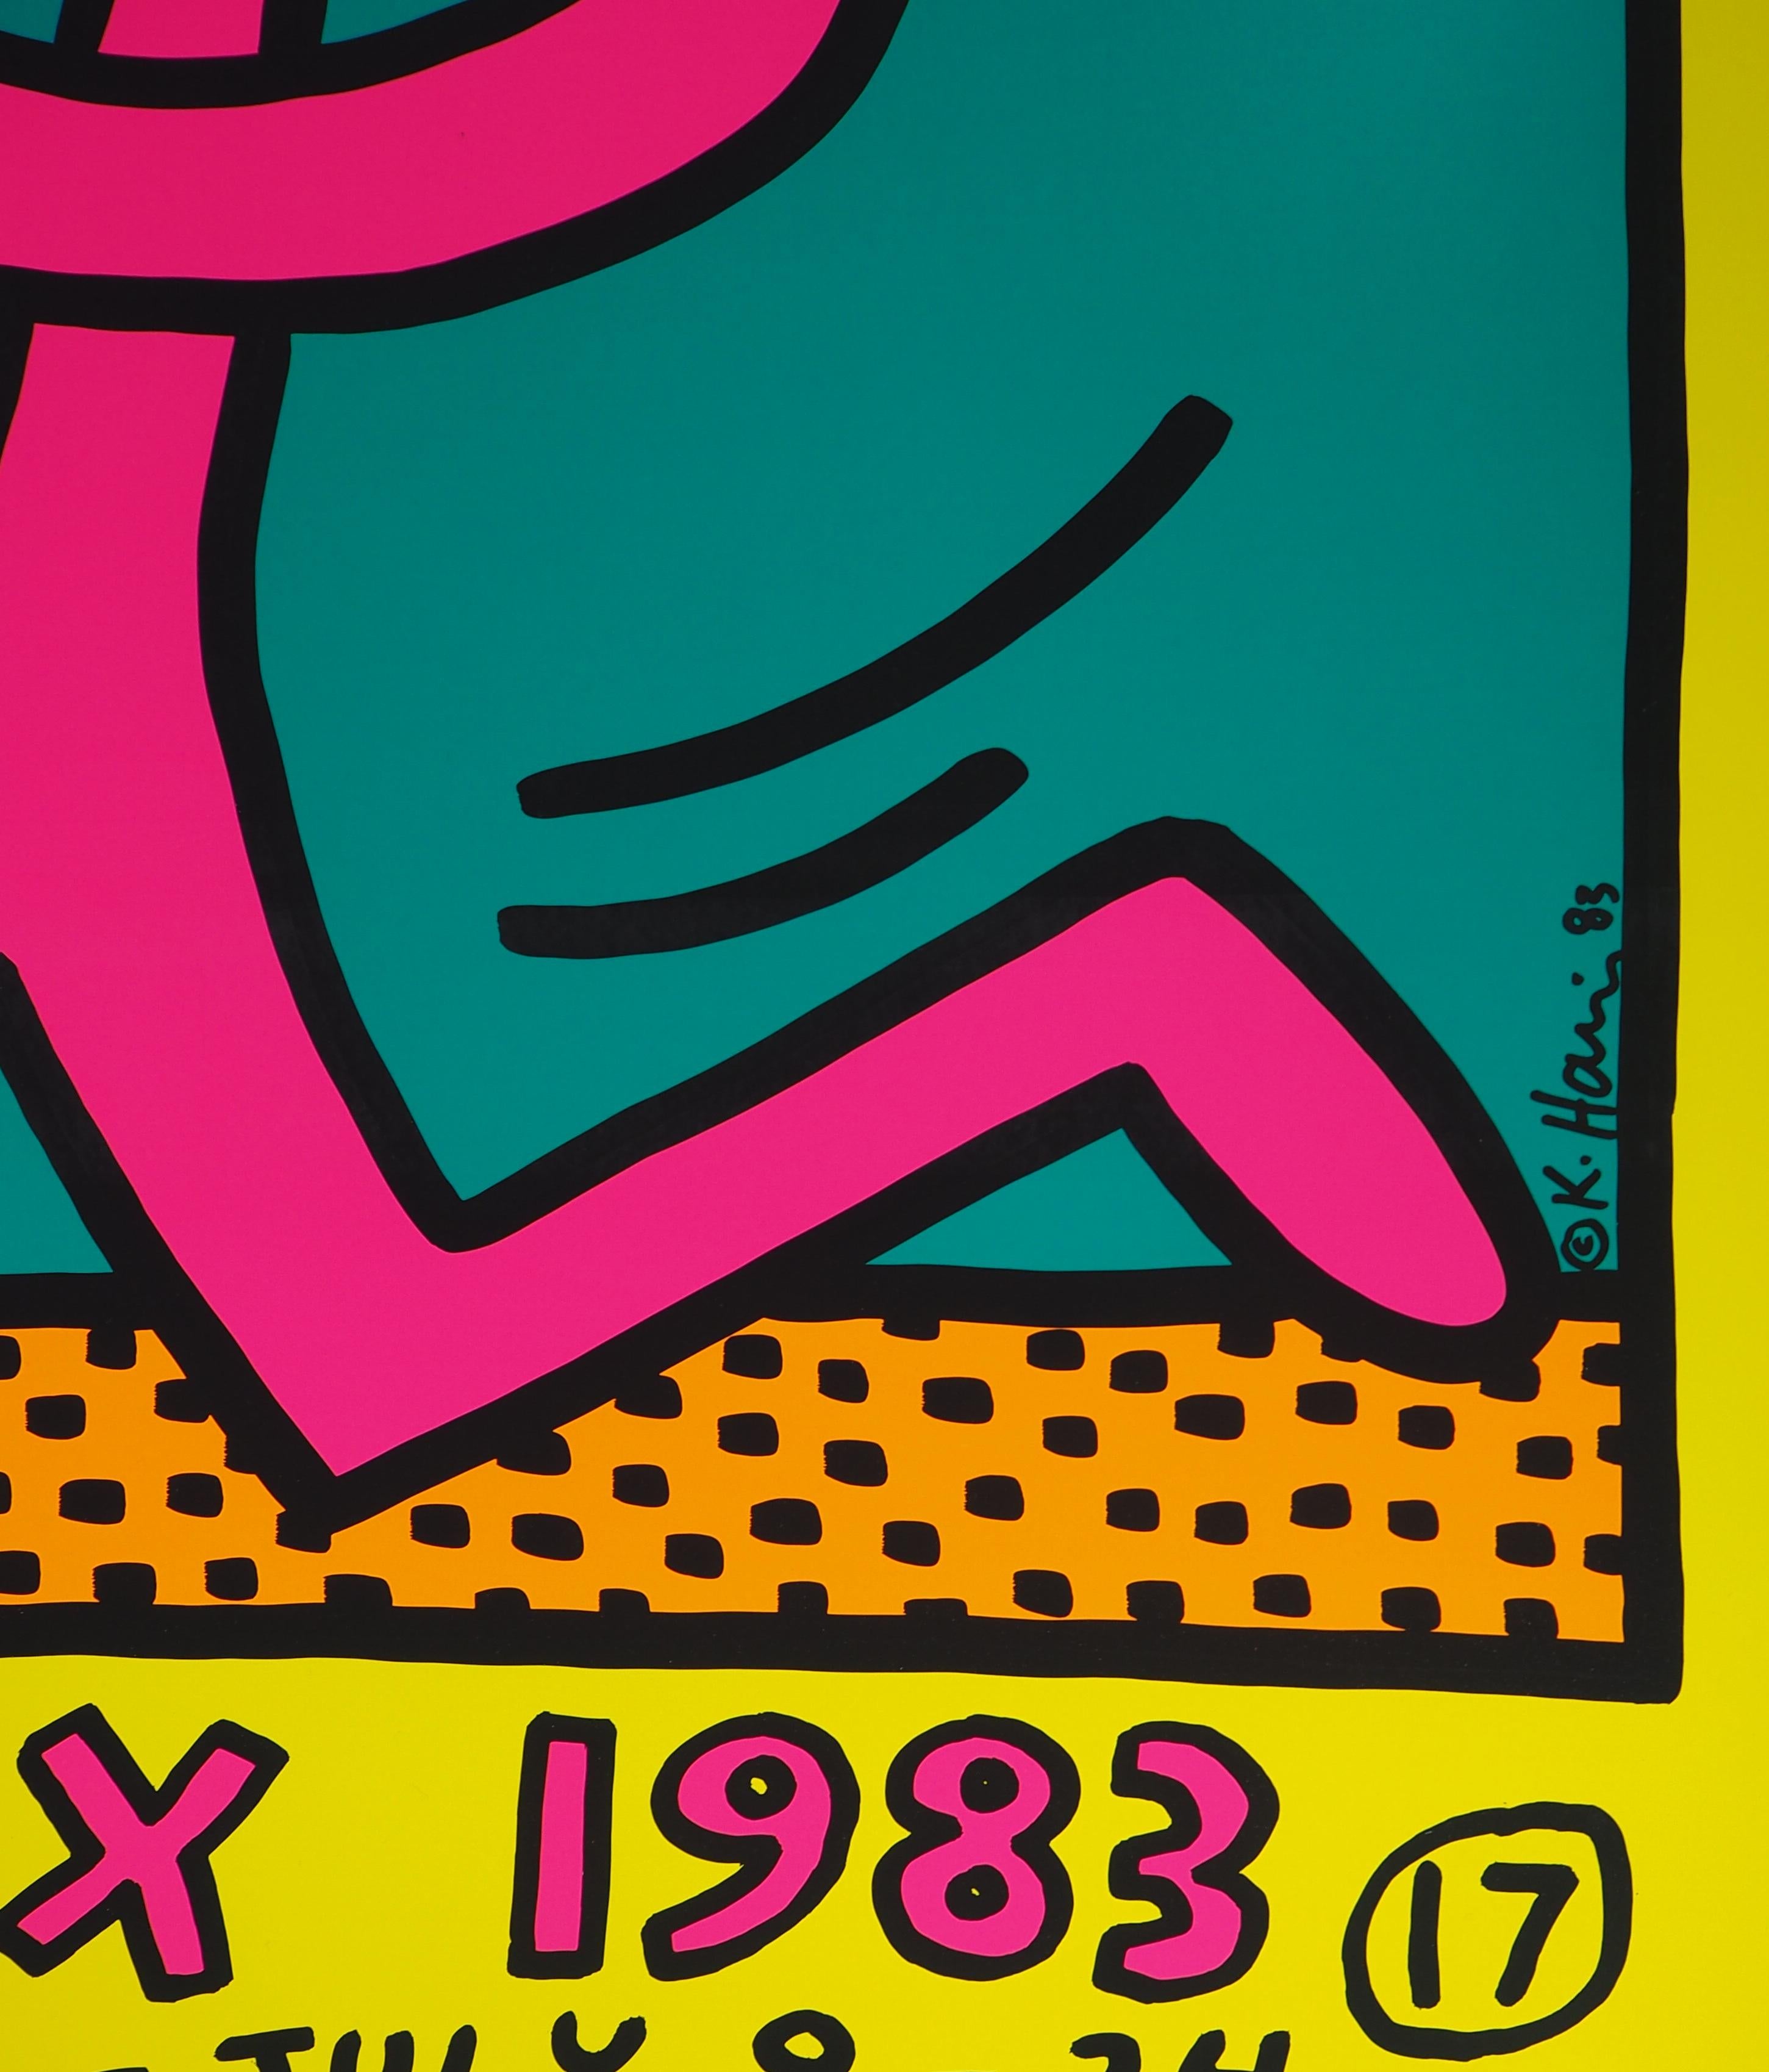 Jazz : Swing Guy (Yellow) - Vintage Screenprint Poster, Montreux, 1983 - Print by (after) Keith Haring